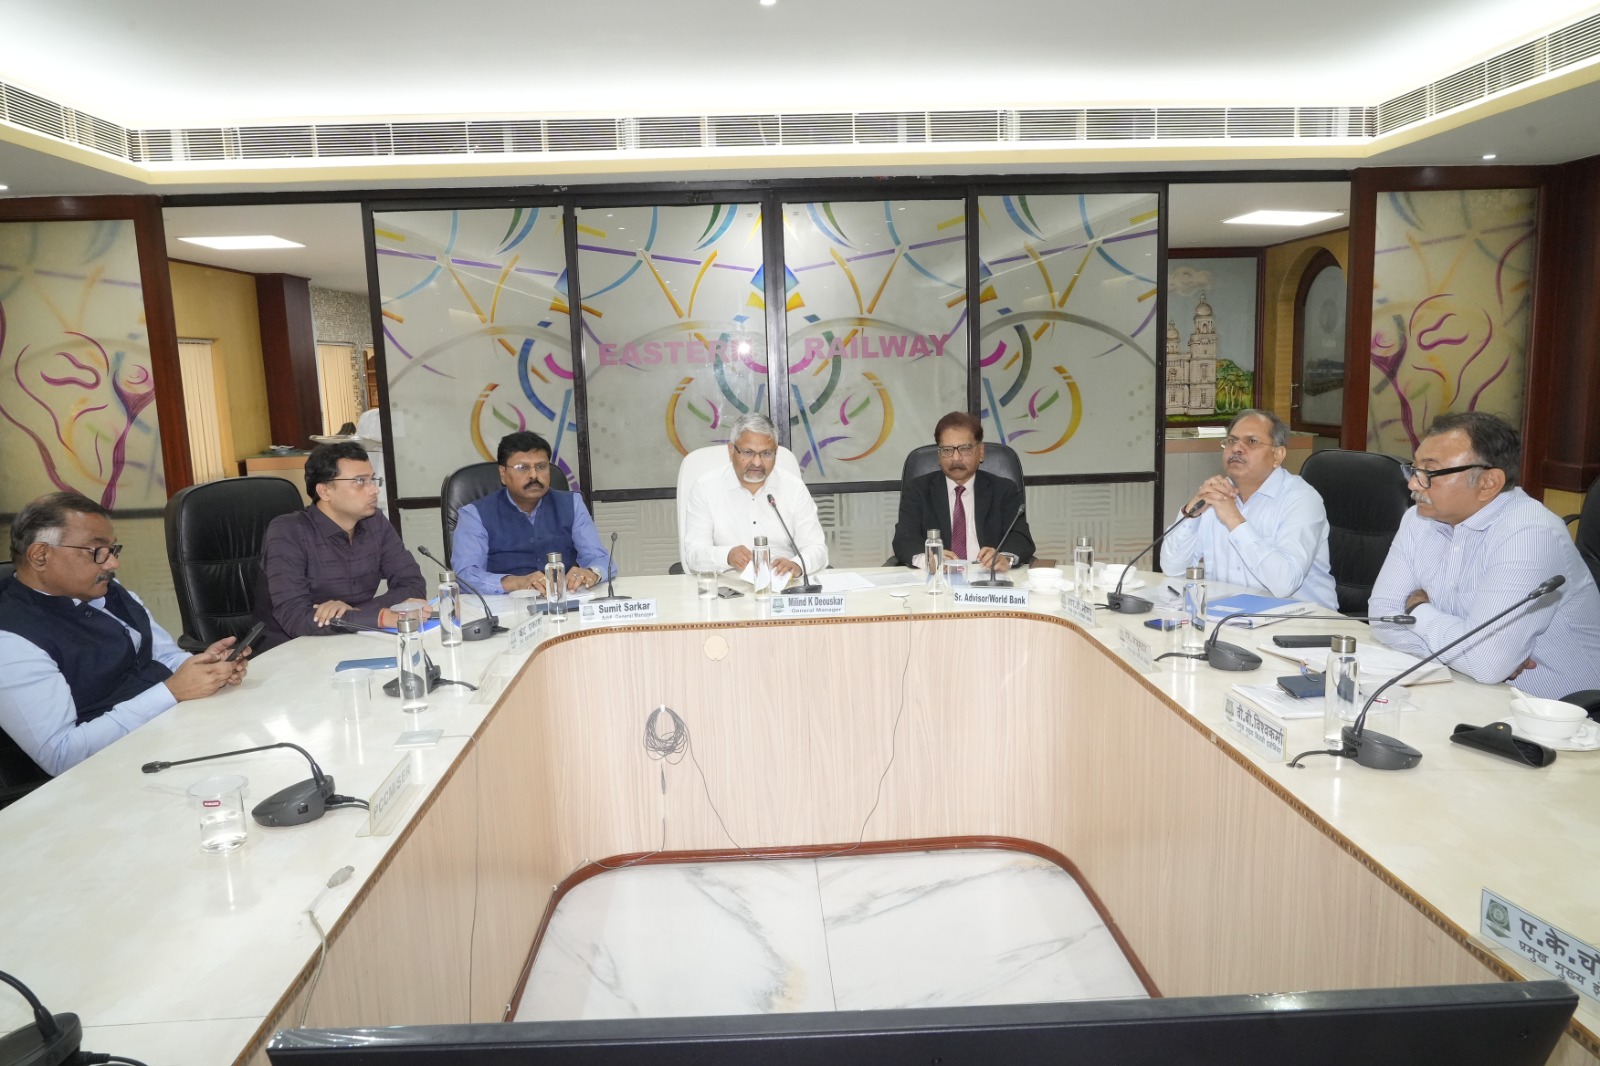 Shri Milind K Deouskar, General Manager, Eastern Railway attended a high-level meeting on “Dissemination Worldhop on World Bank’s Initiative for Regional Rail Integration” with the representatives of World Bank through video conference.